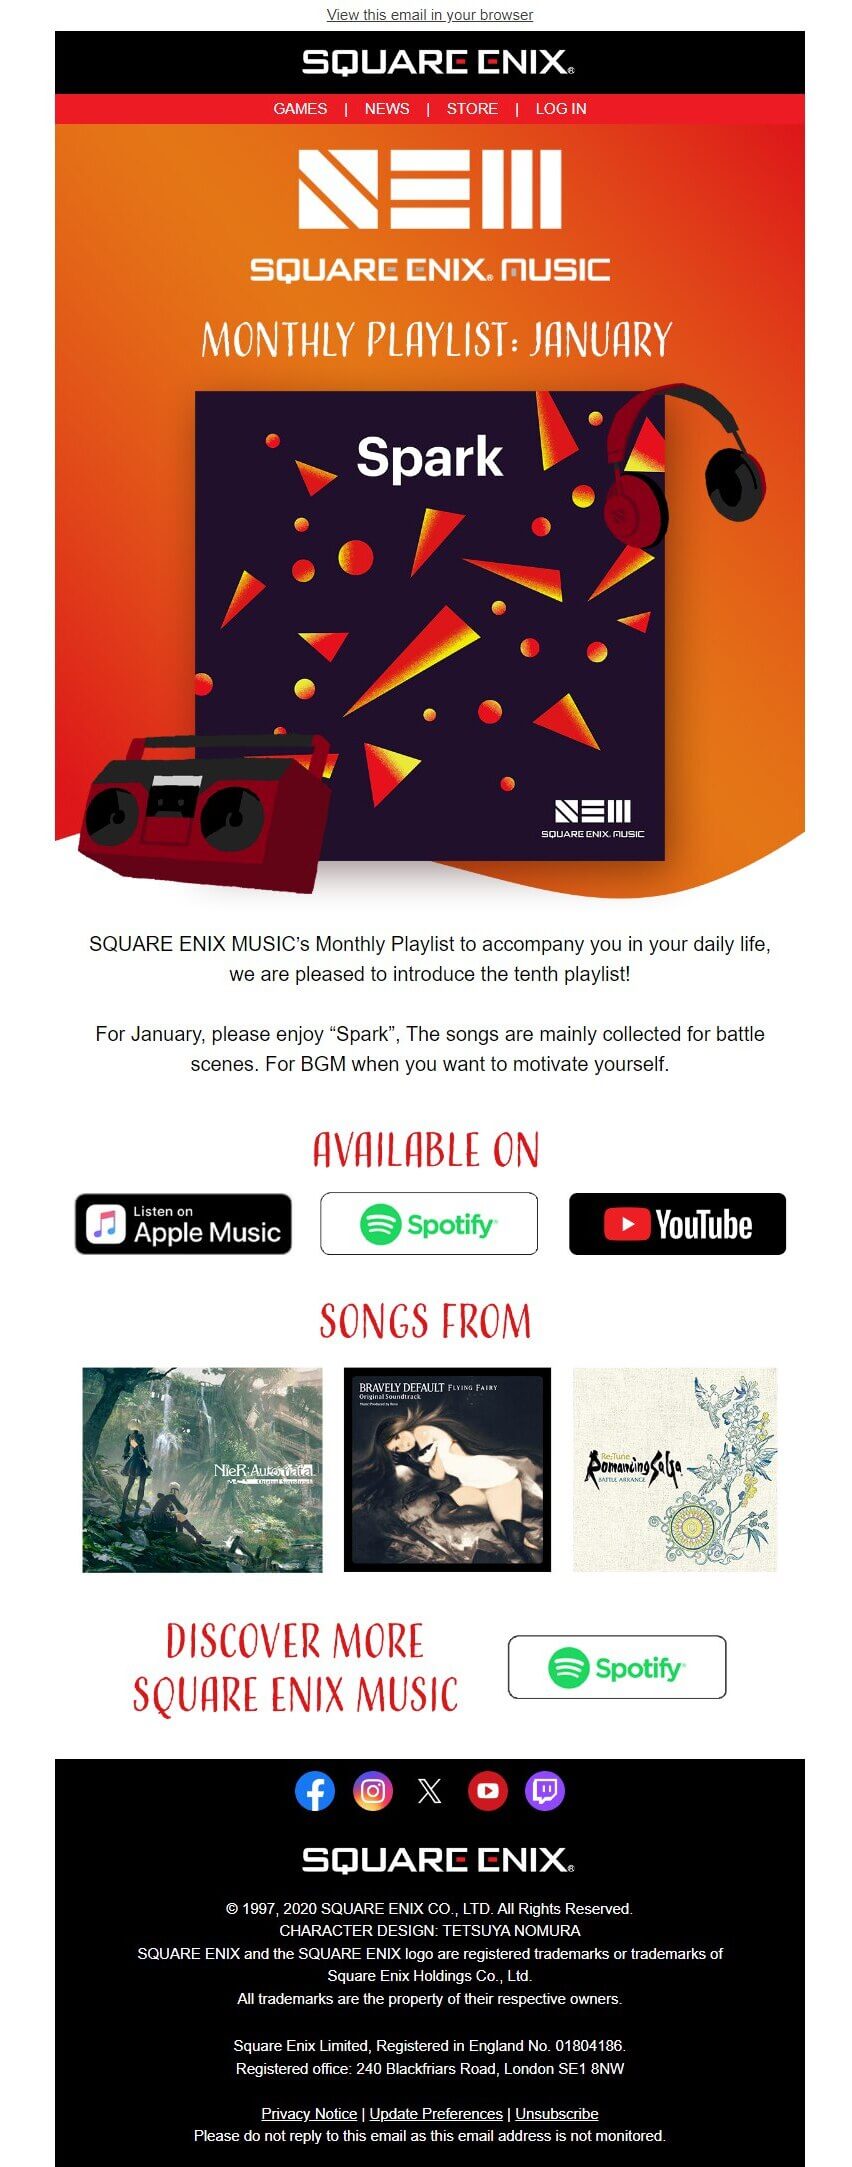 An email from Square Enix that promotes a January playlist of game soundtracks available on different streaming platforms